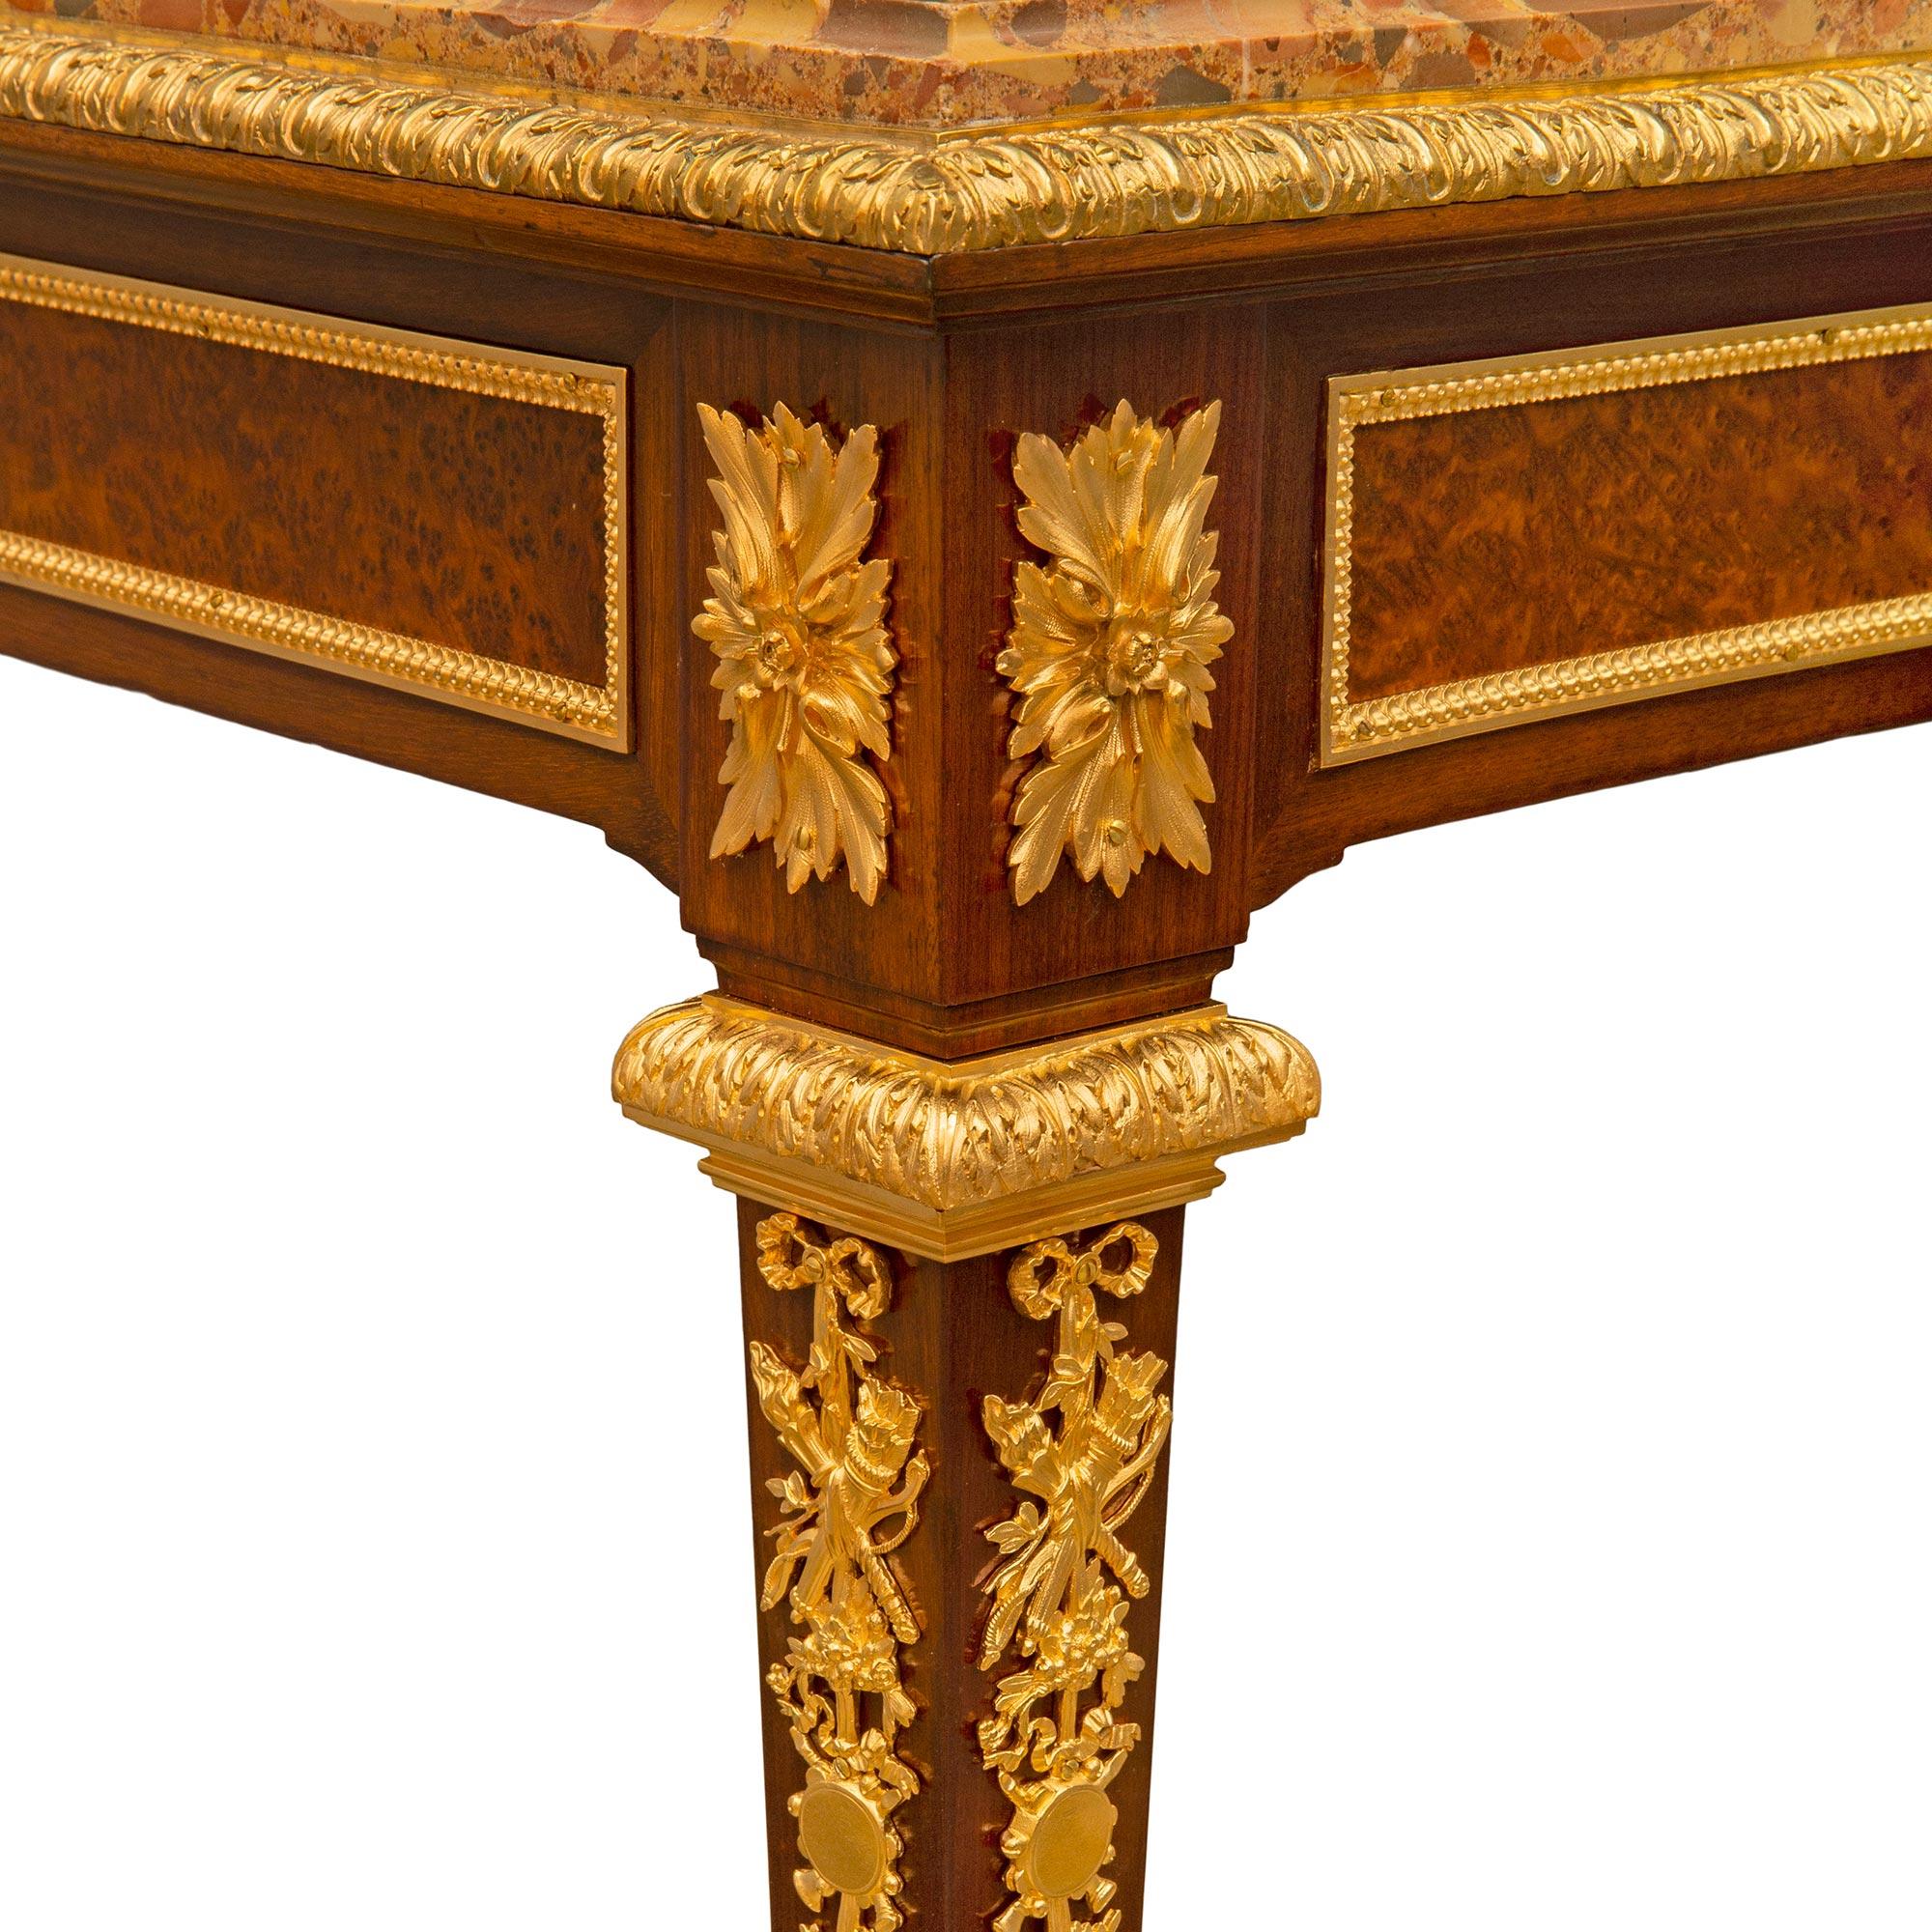 French 19th Century Louis XVI St. Belle Époque Period Table Attributed to Linke For Sale 2